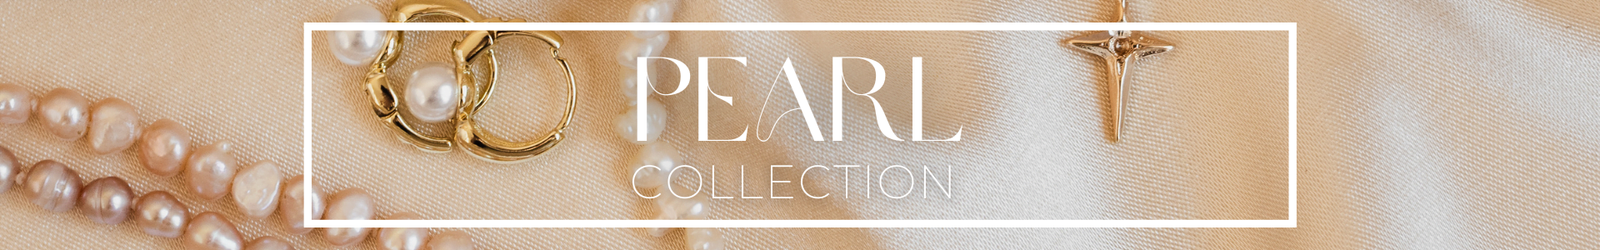 Pearl Collection banner 2